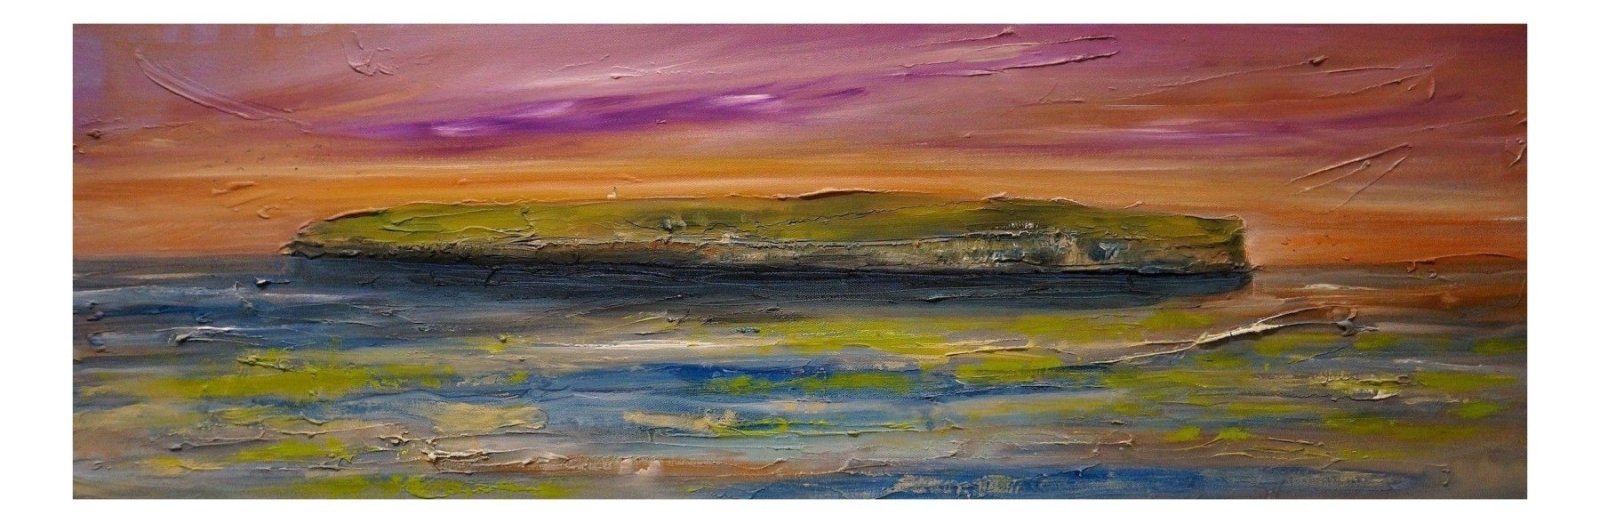 The Brough Of Birsay Orkney-Panoramic Prints-Orkney Art Gallery-Paintings, Prints, Homeware, Art Gifts From Scotland By Scottish Artist Kevin Hunter